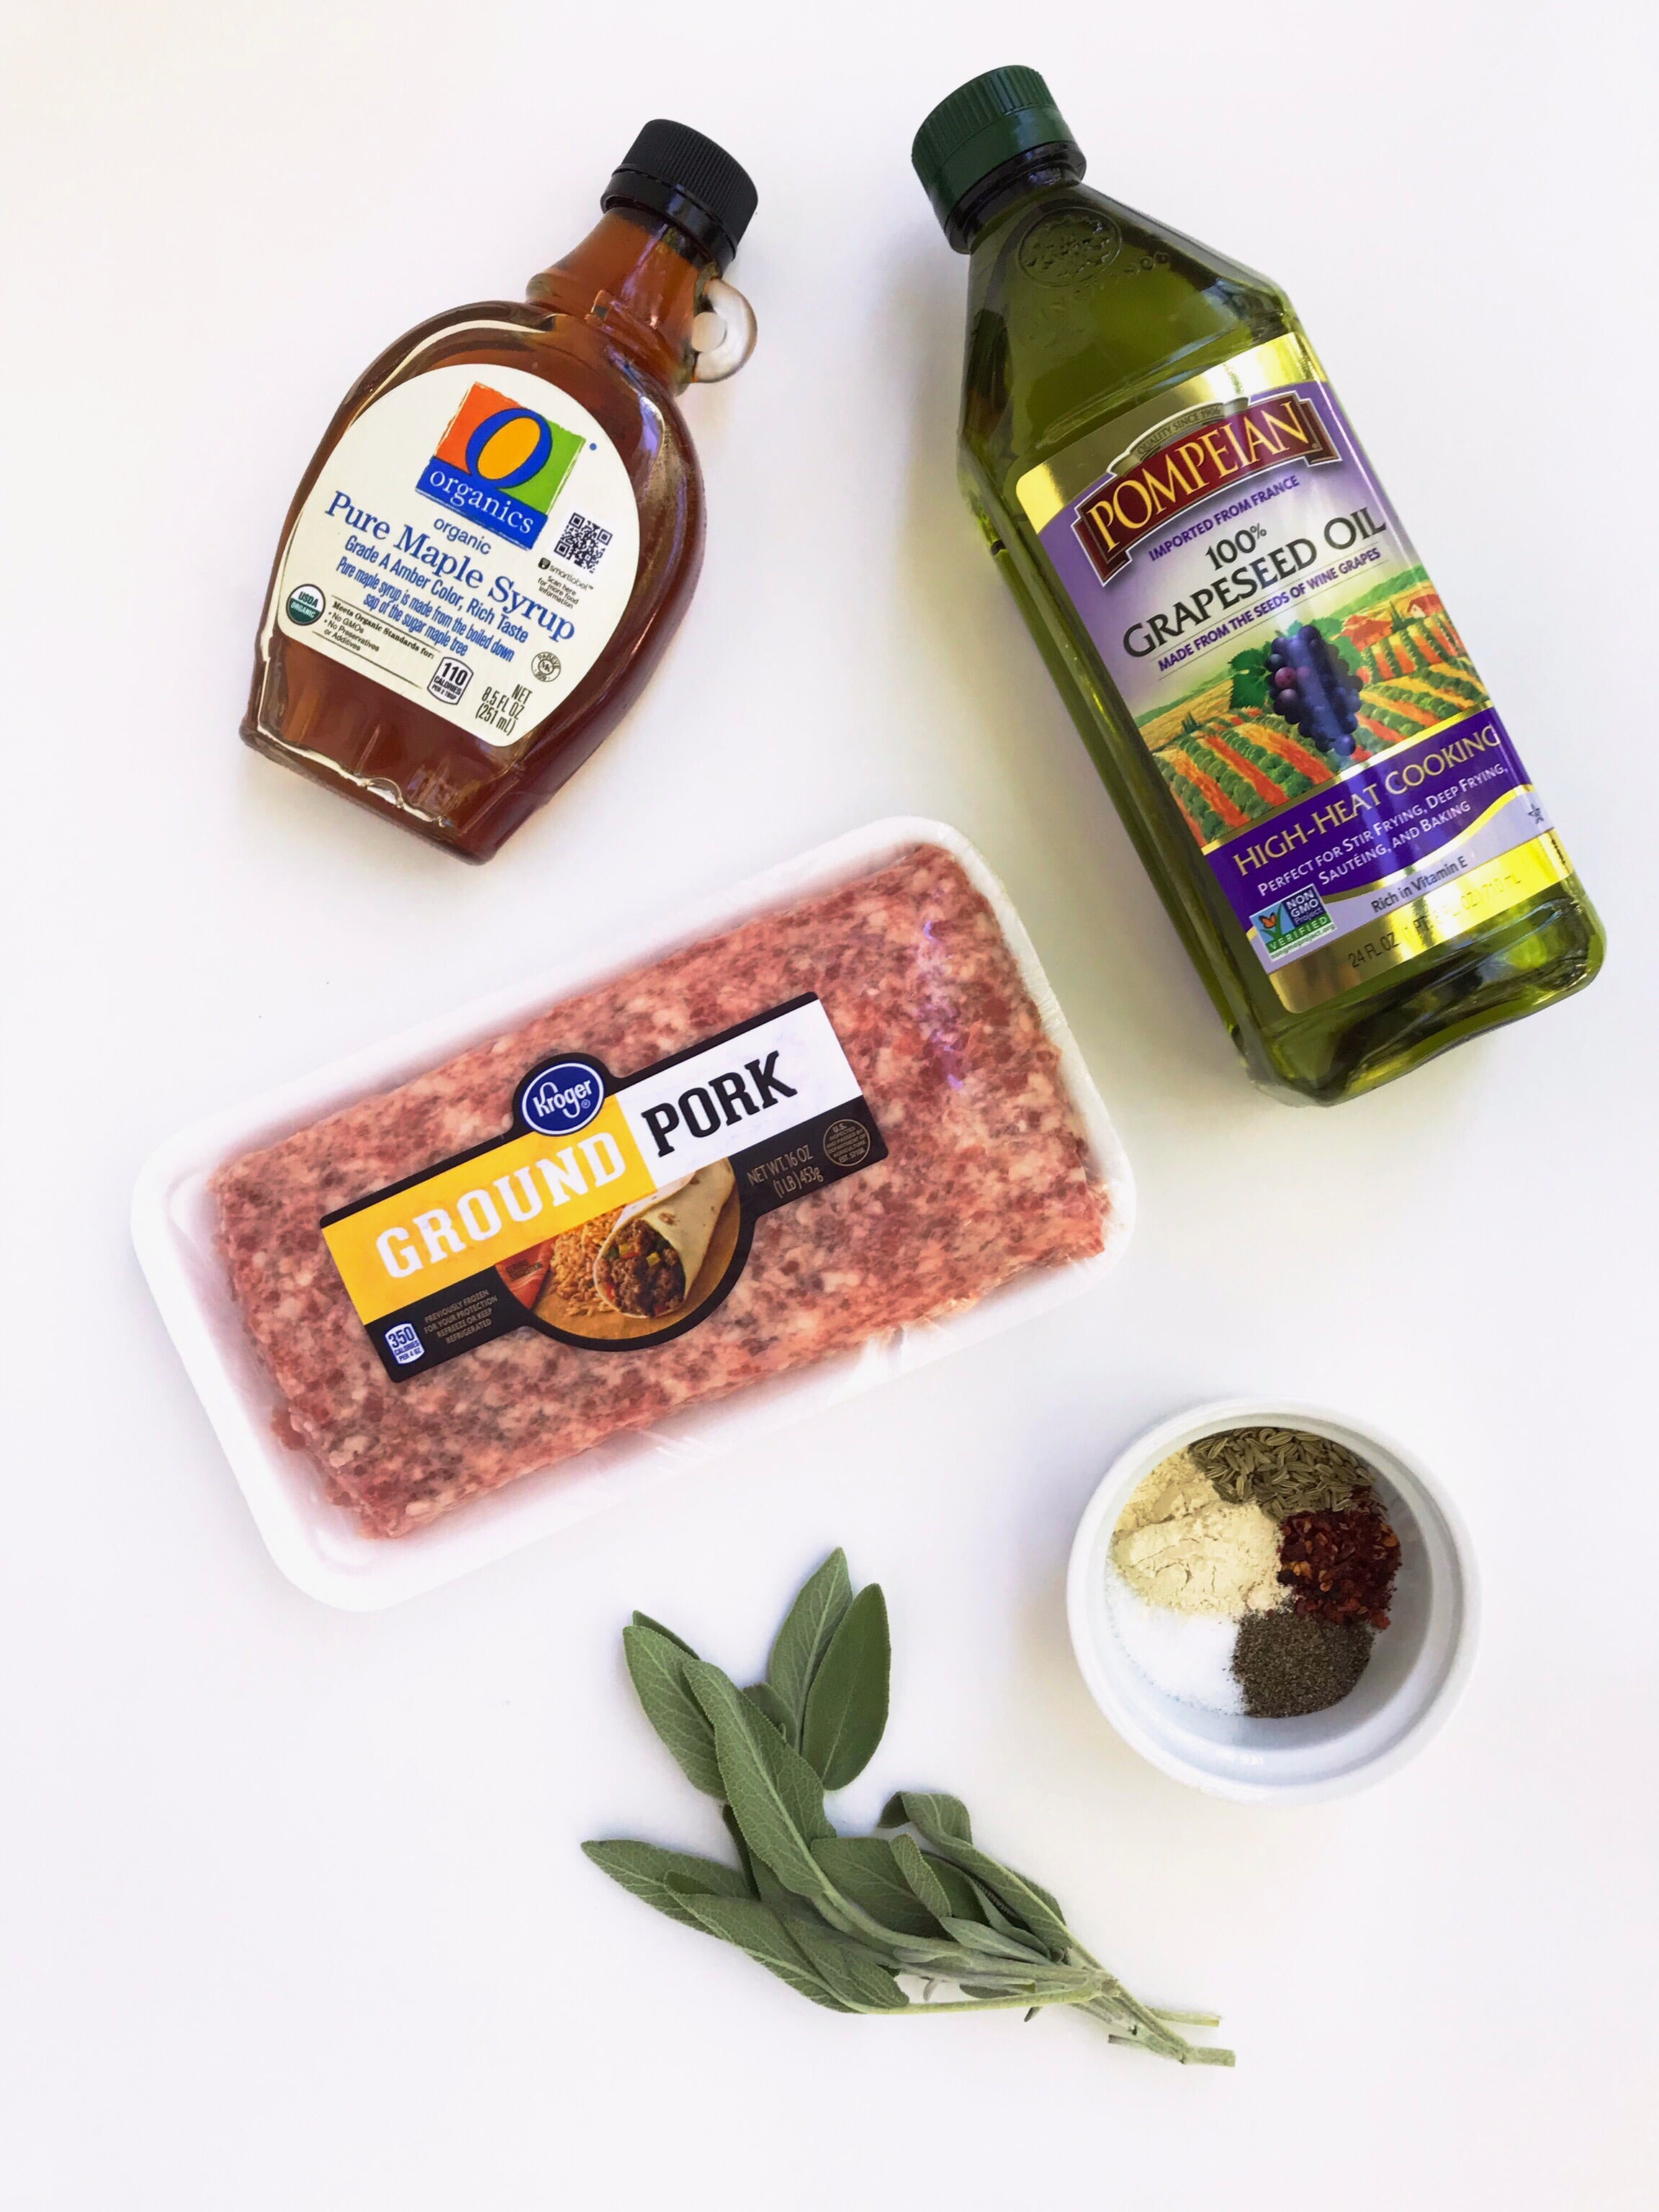 A spread of the ingredients needed to make Maple-Sage Breakfast Patties. Ingredients displayed are ground pork, maple syrup, fresh sage, grapeseed oil, and a mix of dry seasoning.